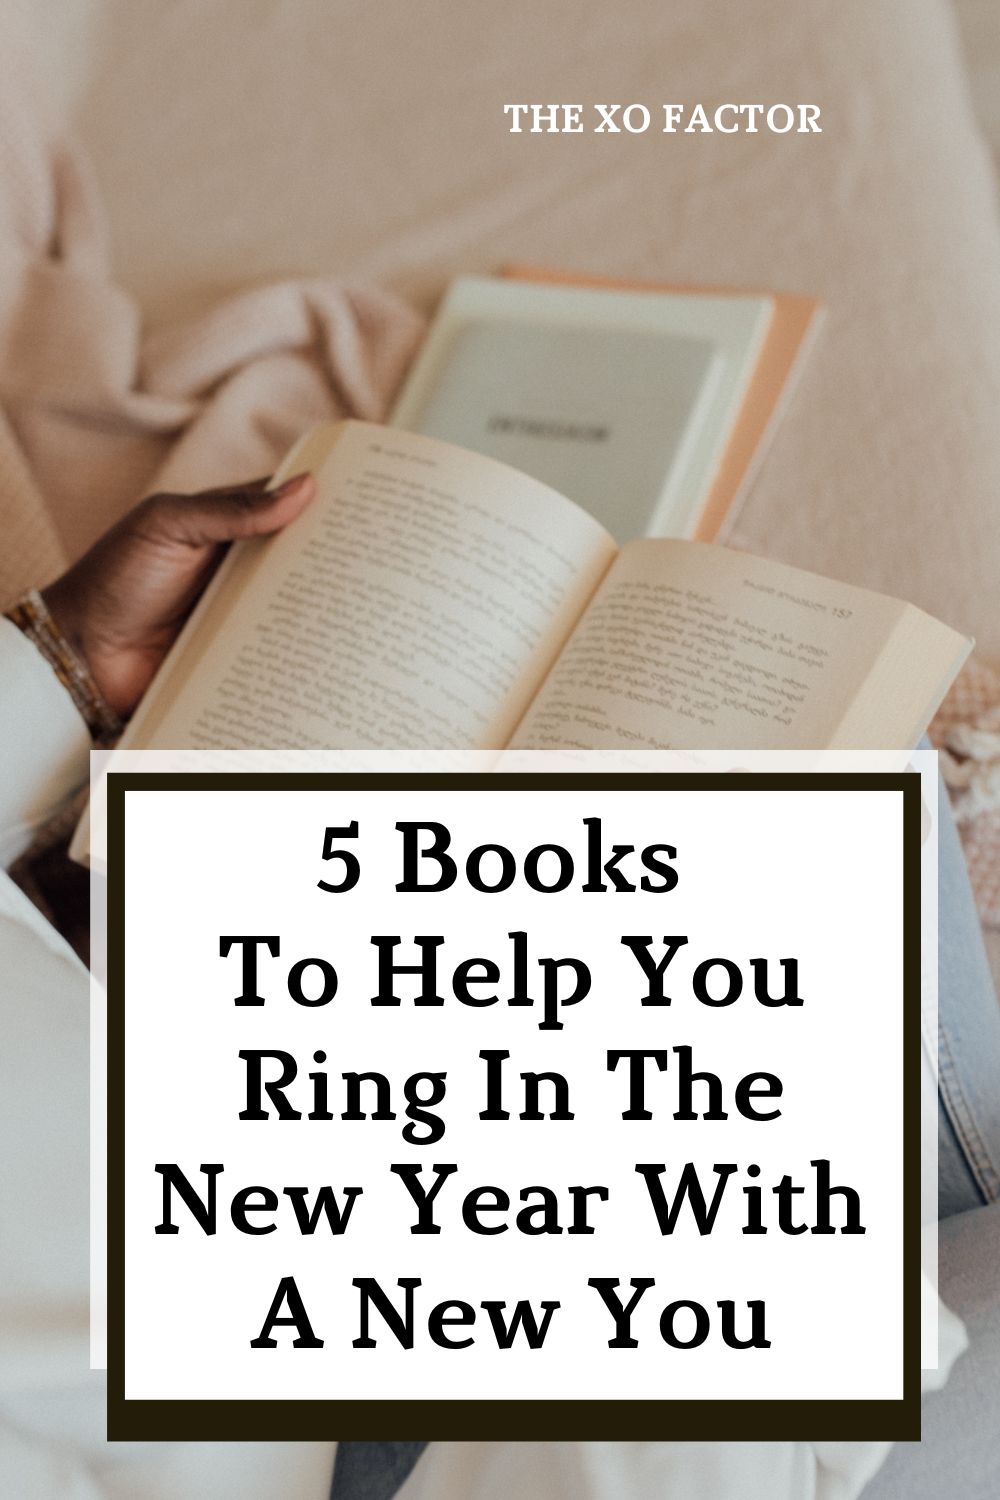 5 Books To Help You Ring In The New Year With A New You